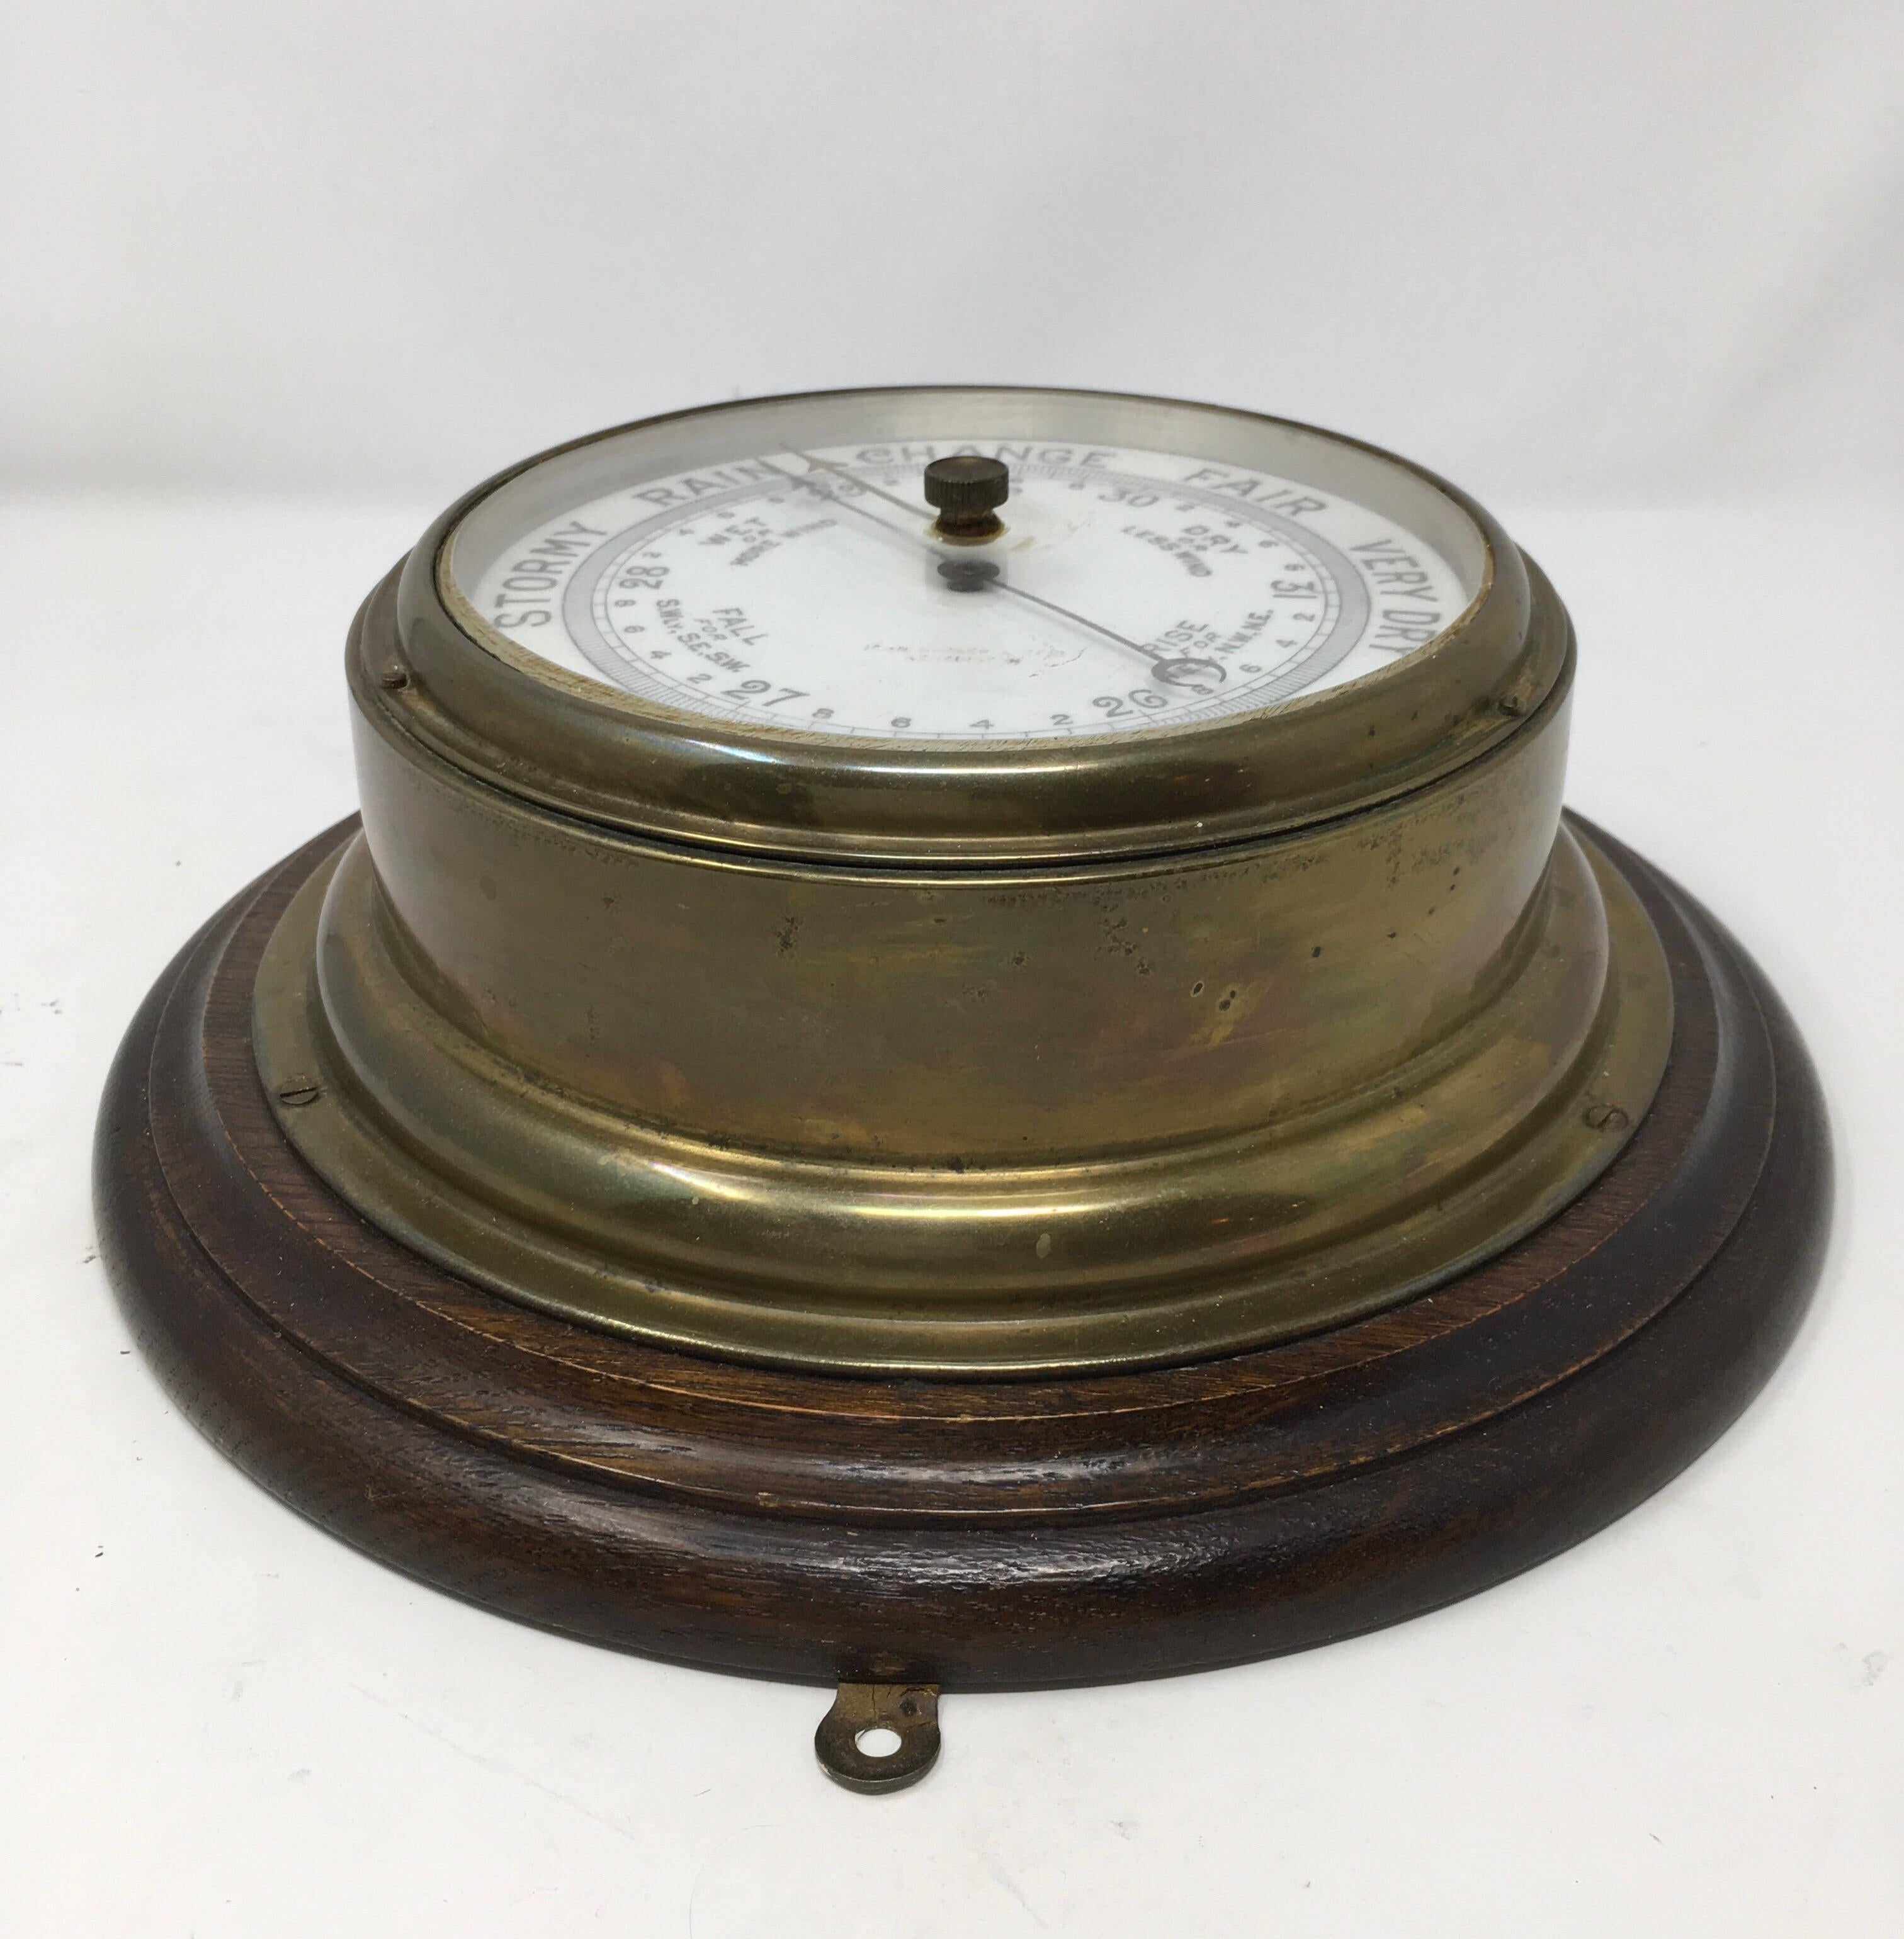 An Edwardian aneroid ships barometer by John Barker & Co LTD Kensington. The barometer is brass cased and mounted on an original oak surround and has bevelled glass to the dial. The dial is faintly marked 'John Barker & Co Ltd, Kensington', circa